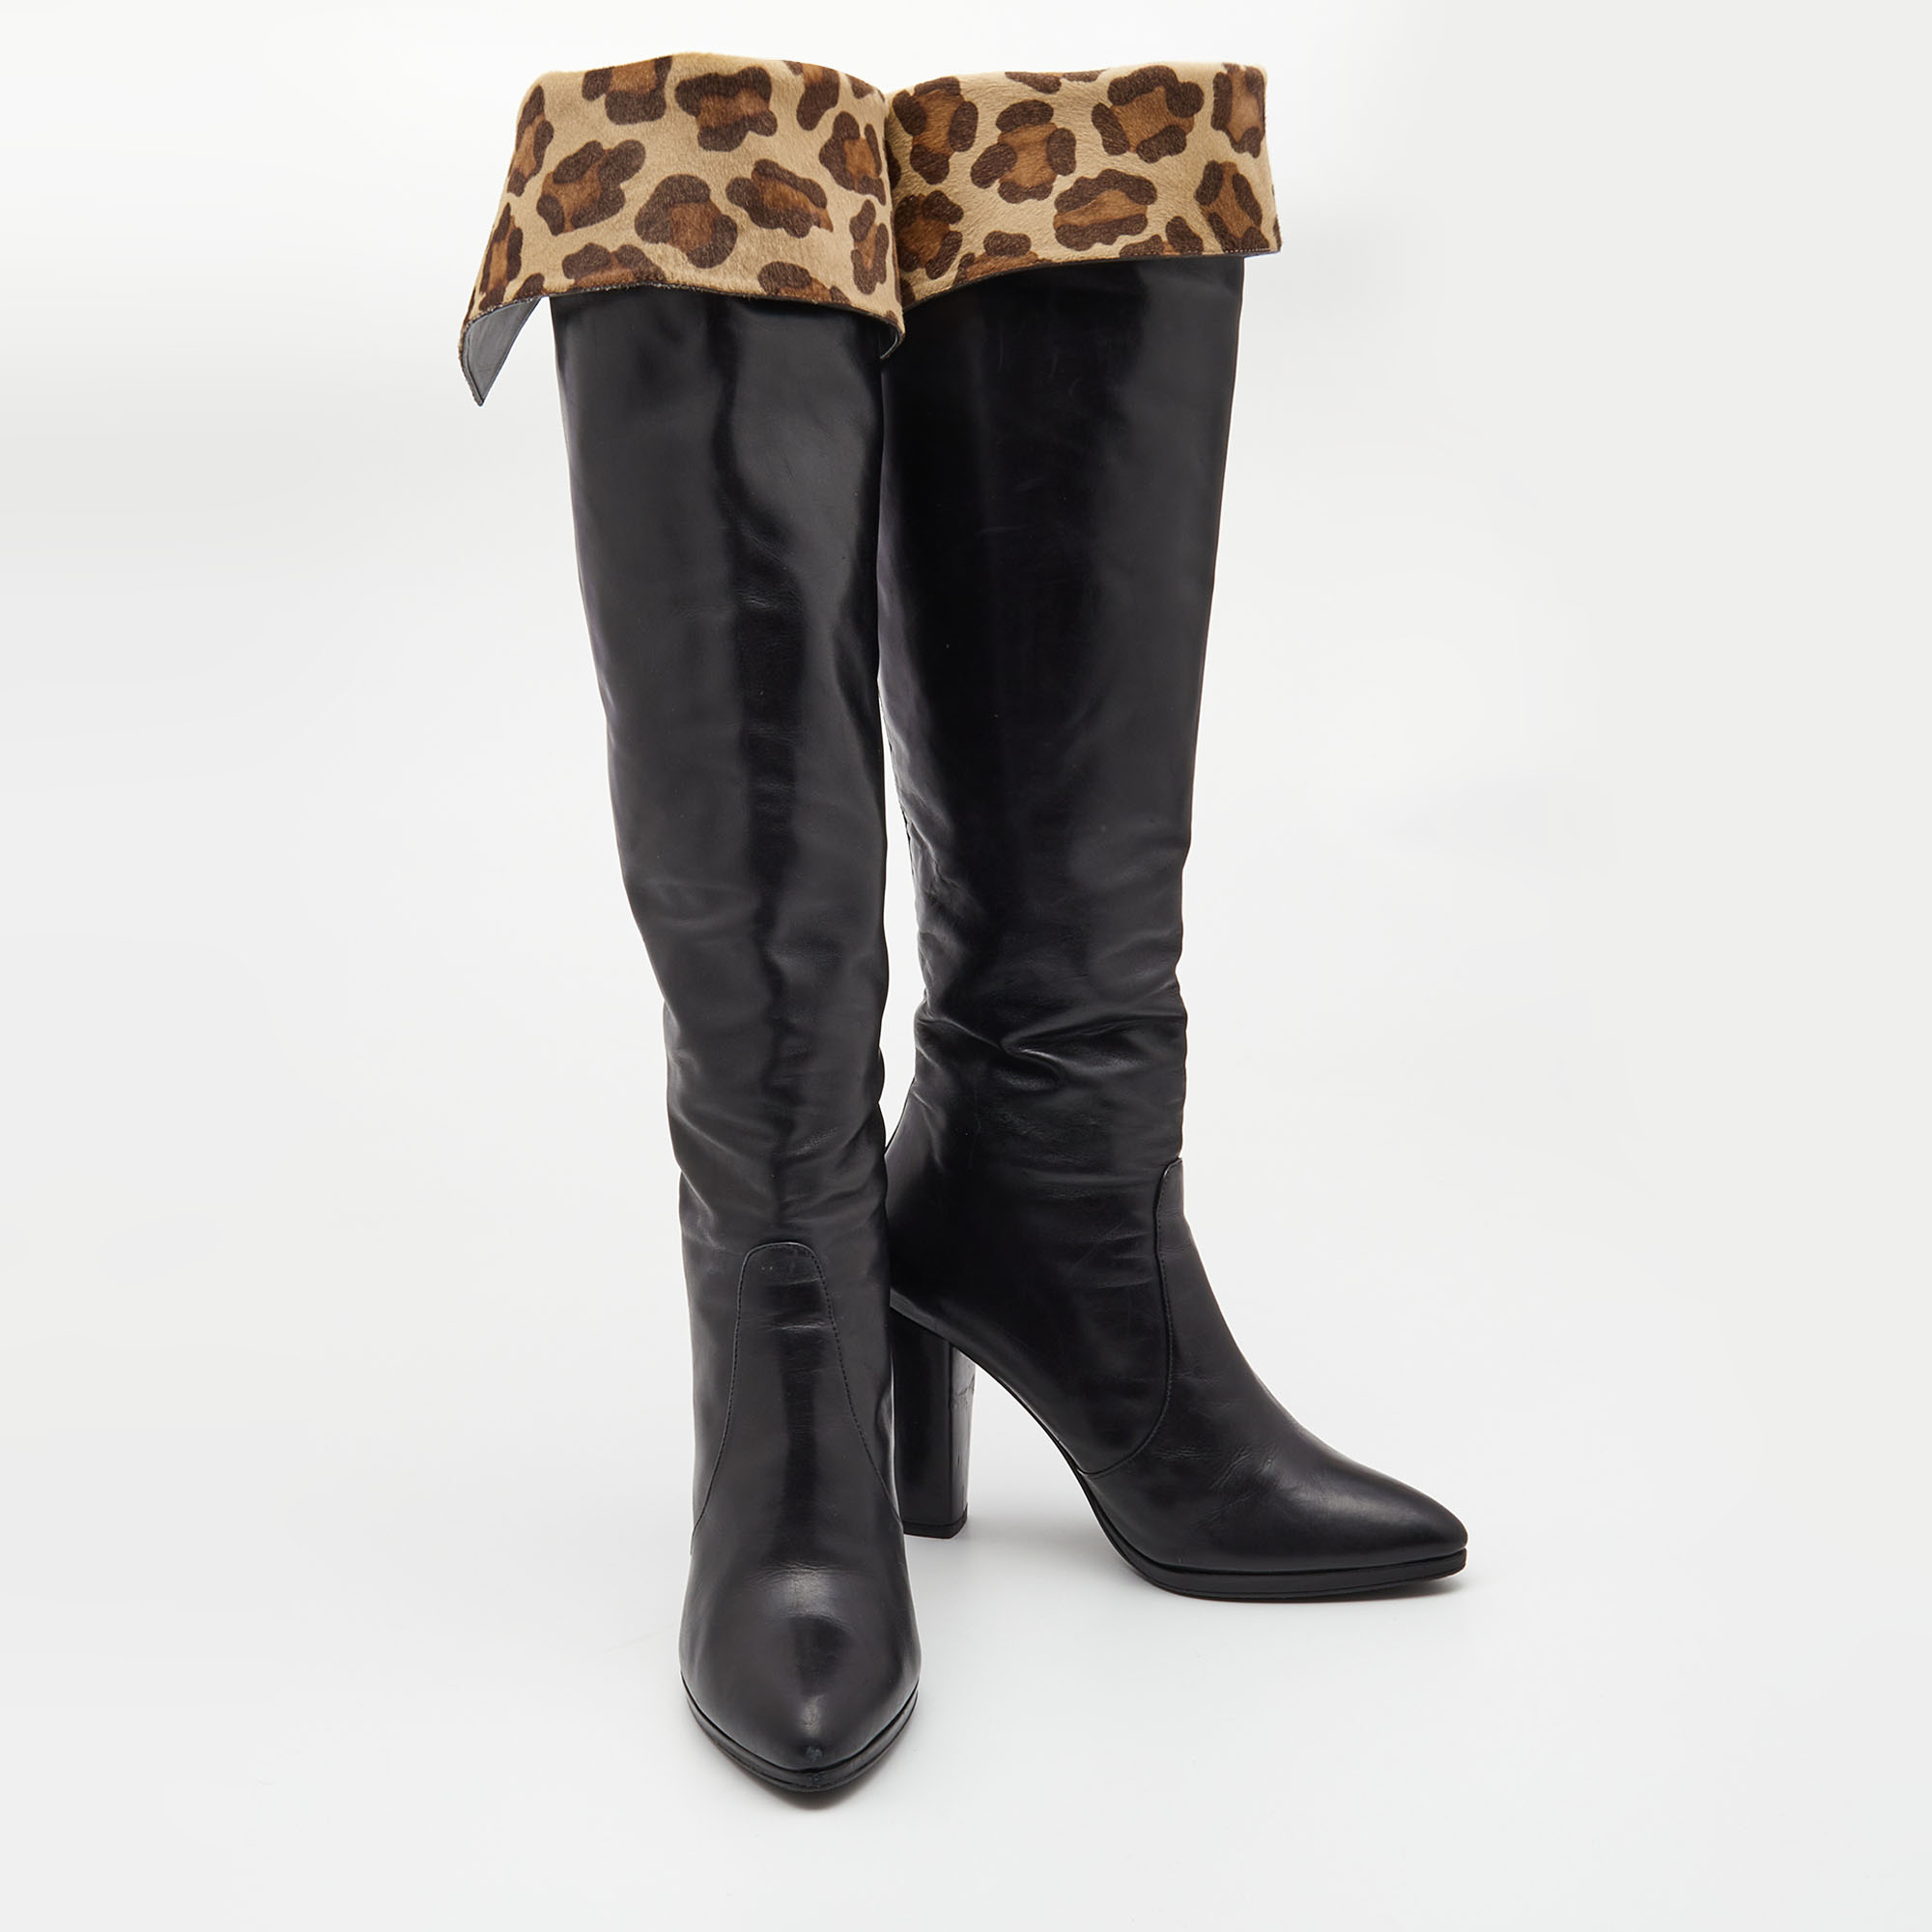 Stuart Weitzman Black Leather And Leopard Calf Hair Knee Length Boots Size 39